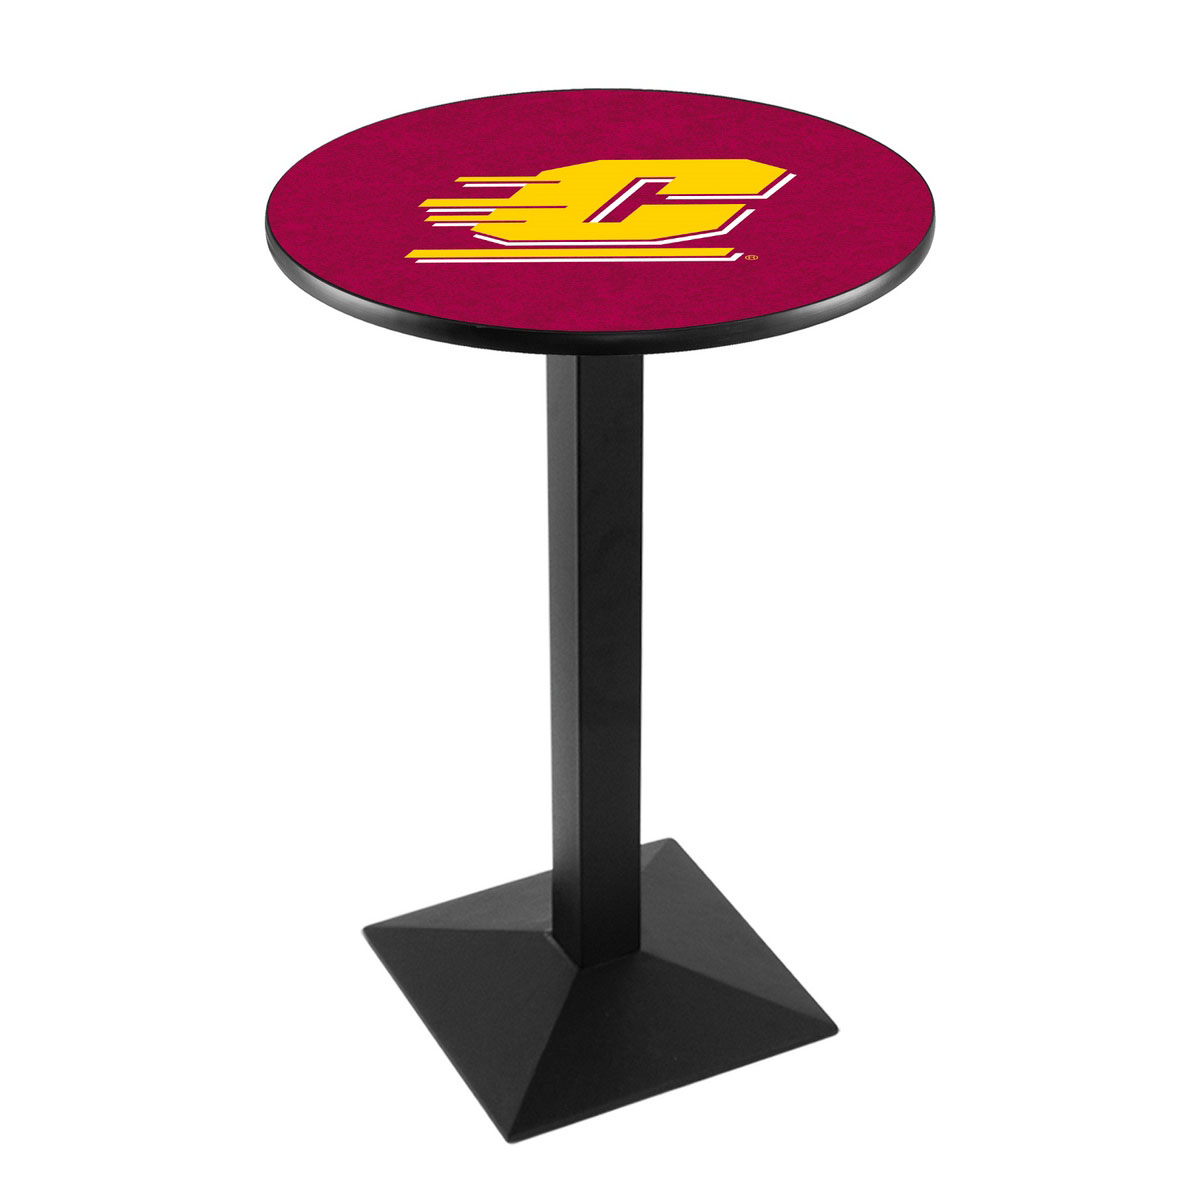 Central Michigan University Logo Pub Bar Table With Square Stand